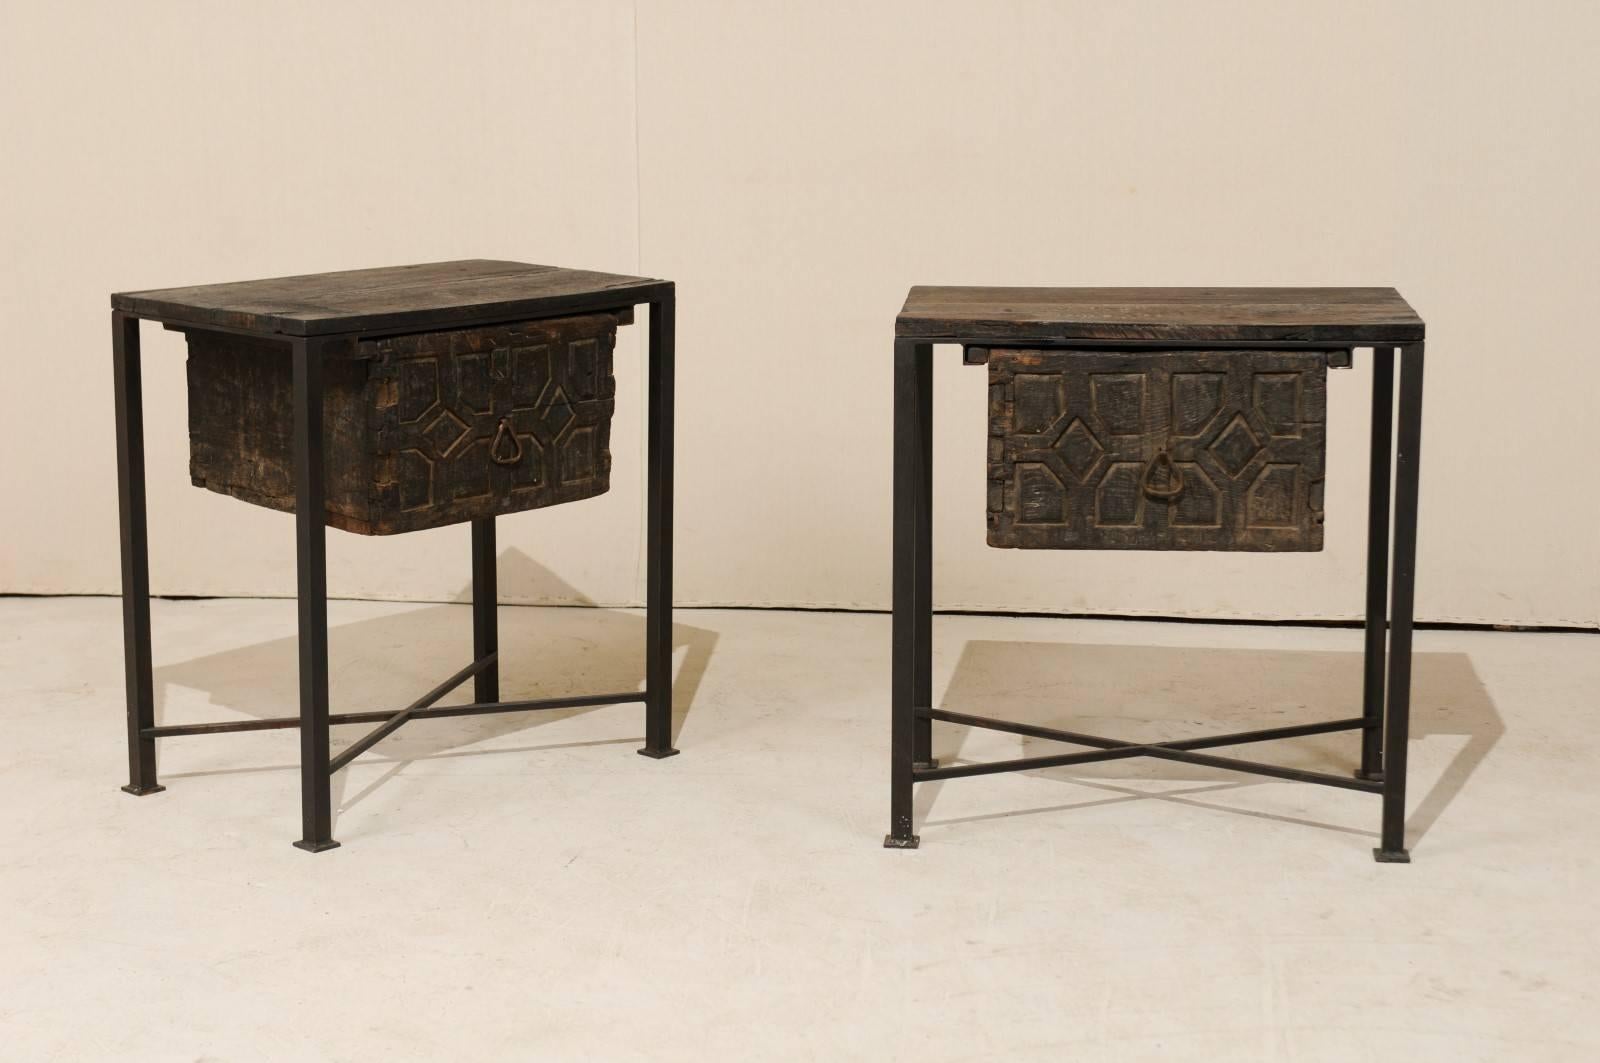 A pair of unique 18th century Spanish chests / side tables. This pair of 18th century (or earlier) Spanish drawers have been set into a custom iron base and older wood tops to produce this fantastic pair of statement pieces. The tops and drawers are